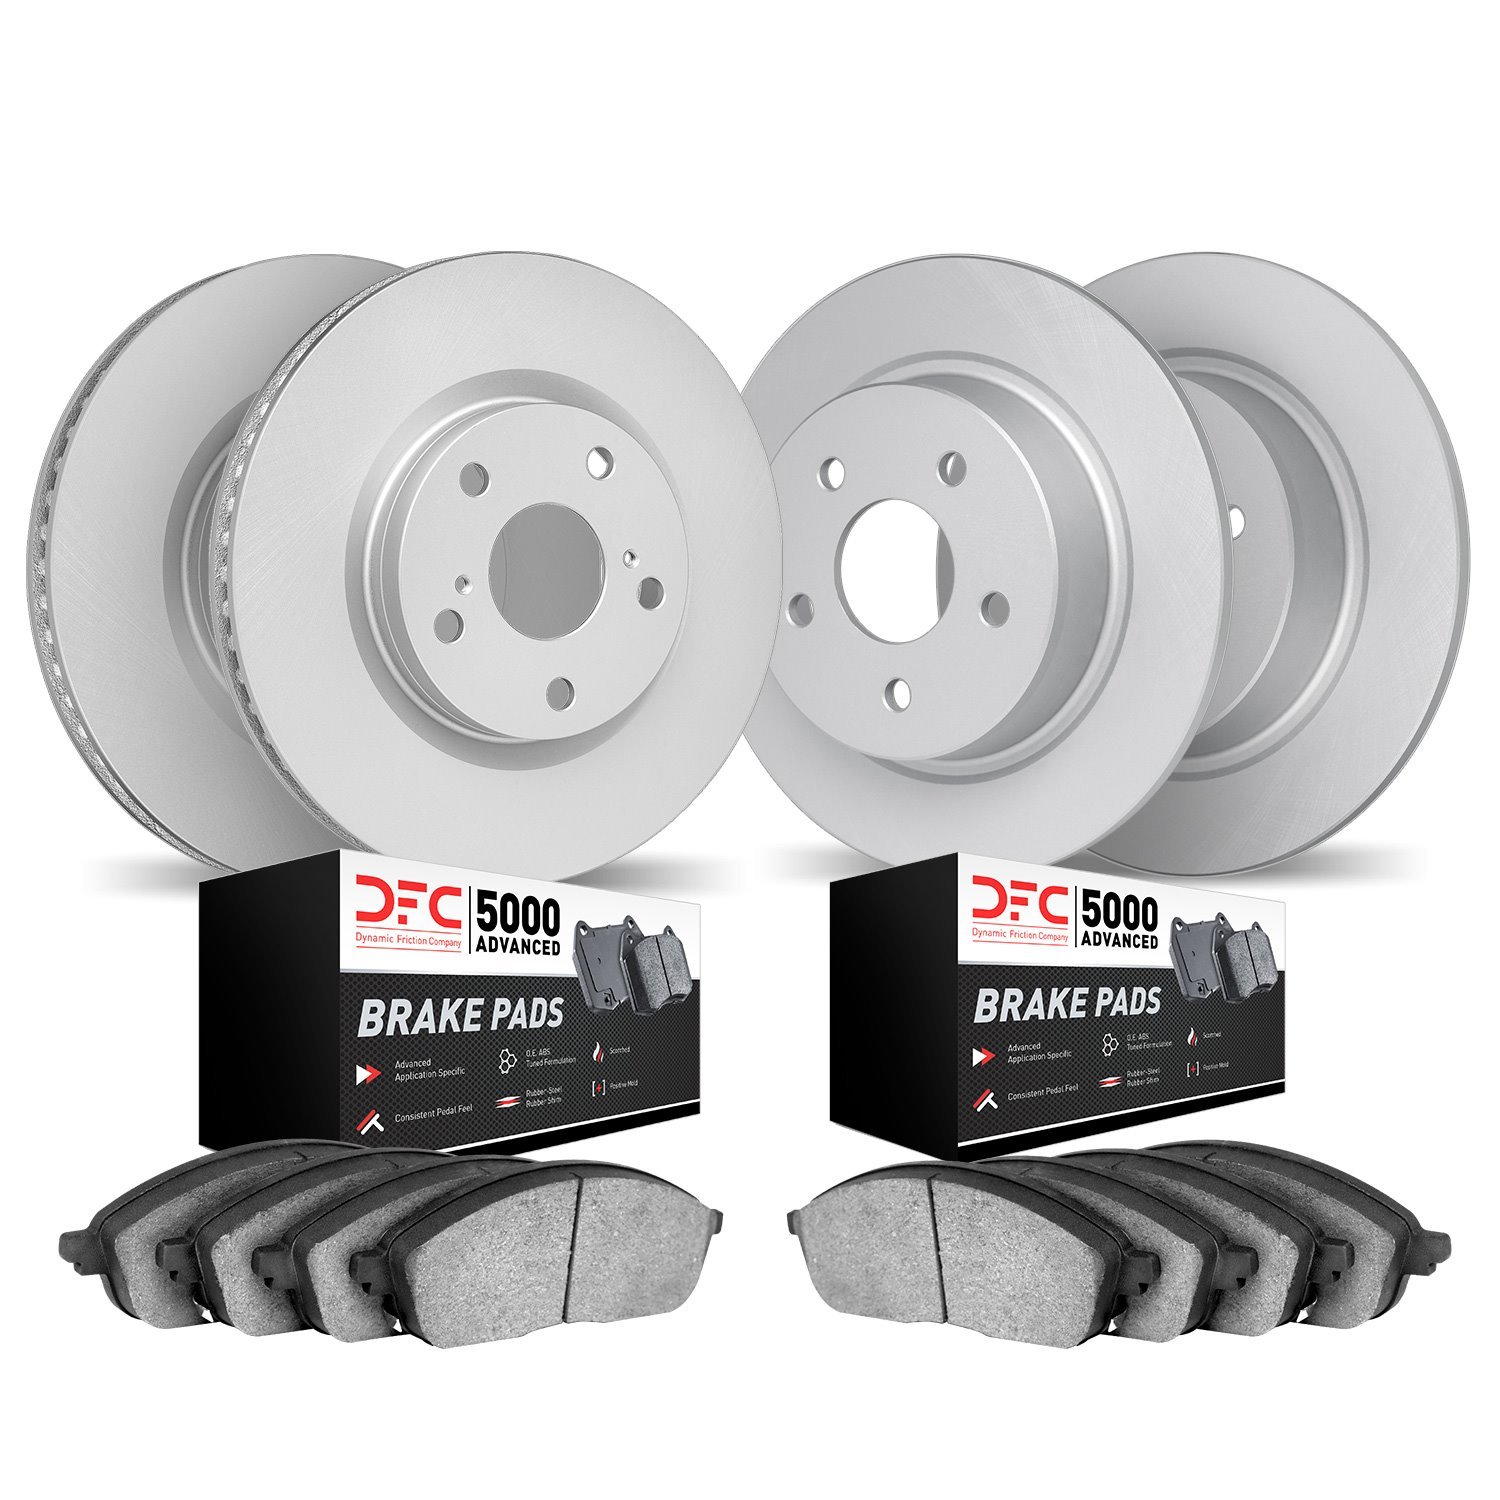 4504-76108 Geospec Brake Rotors w/5000 Advanced Brake Pads Kit, Fits Select Lexus/Toyota/Scion, Position: Front and Rear